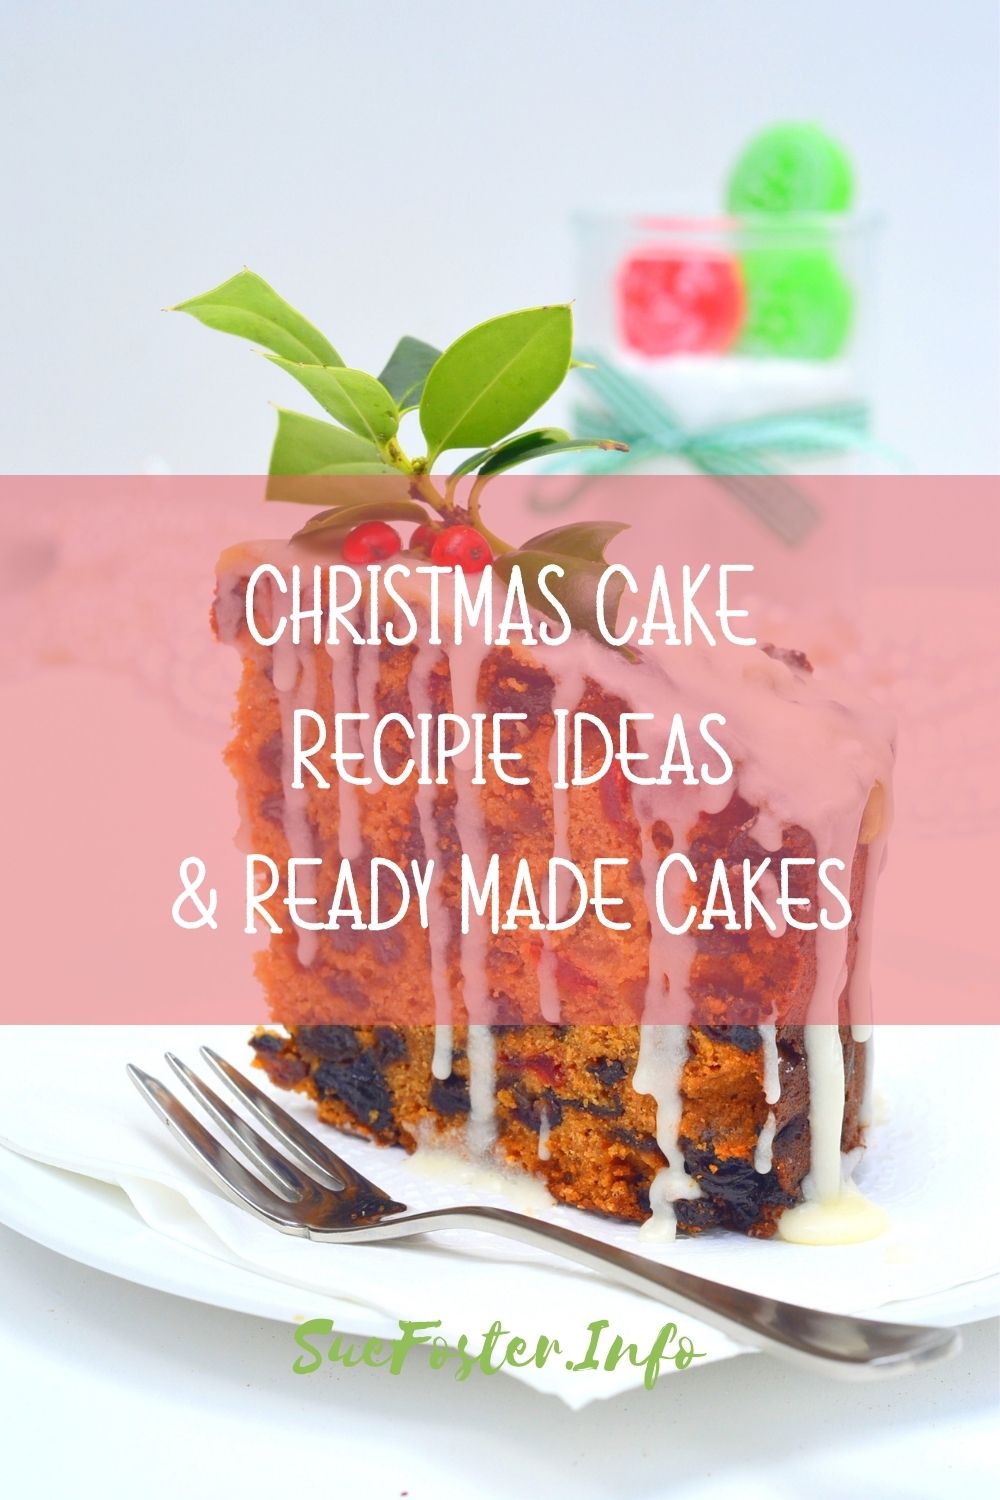 In this post, I’ve put together some Christmas cake recipe ideas, cake mixes and ready-made, homemade cakes for anyone short on time.